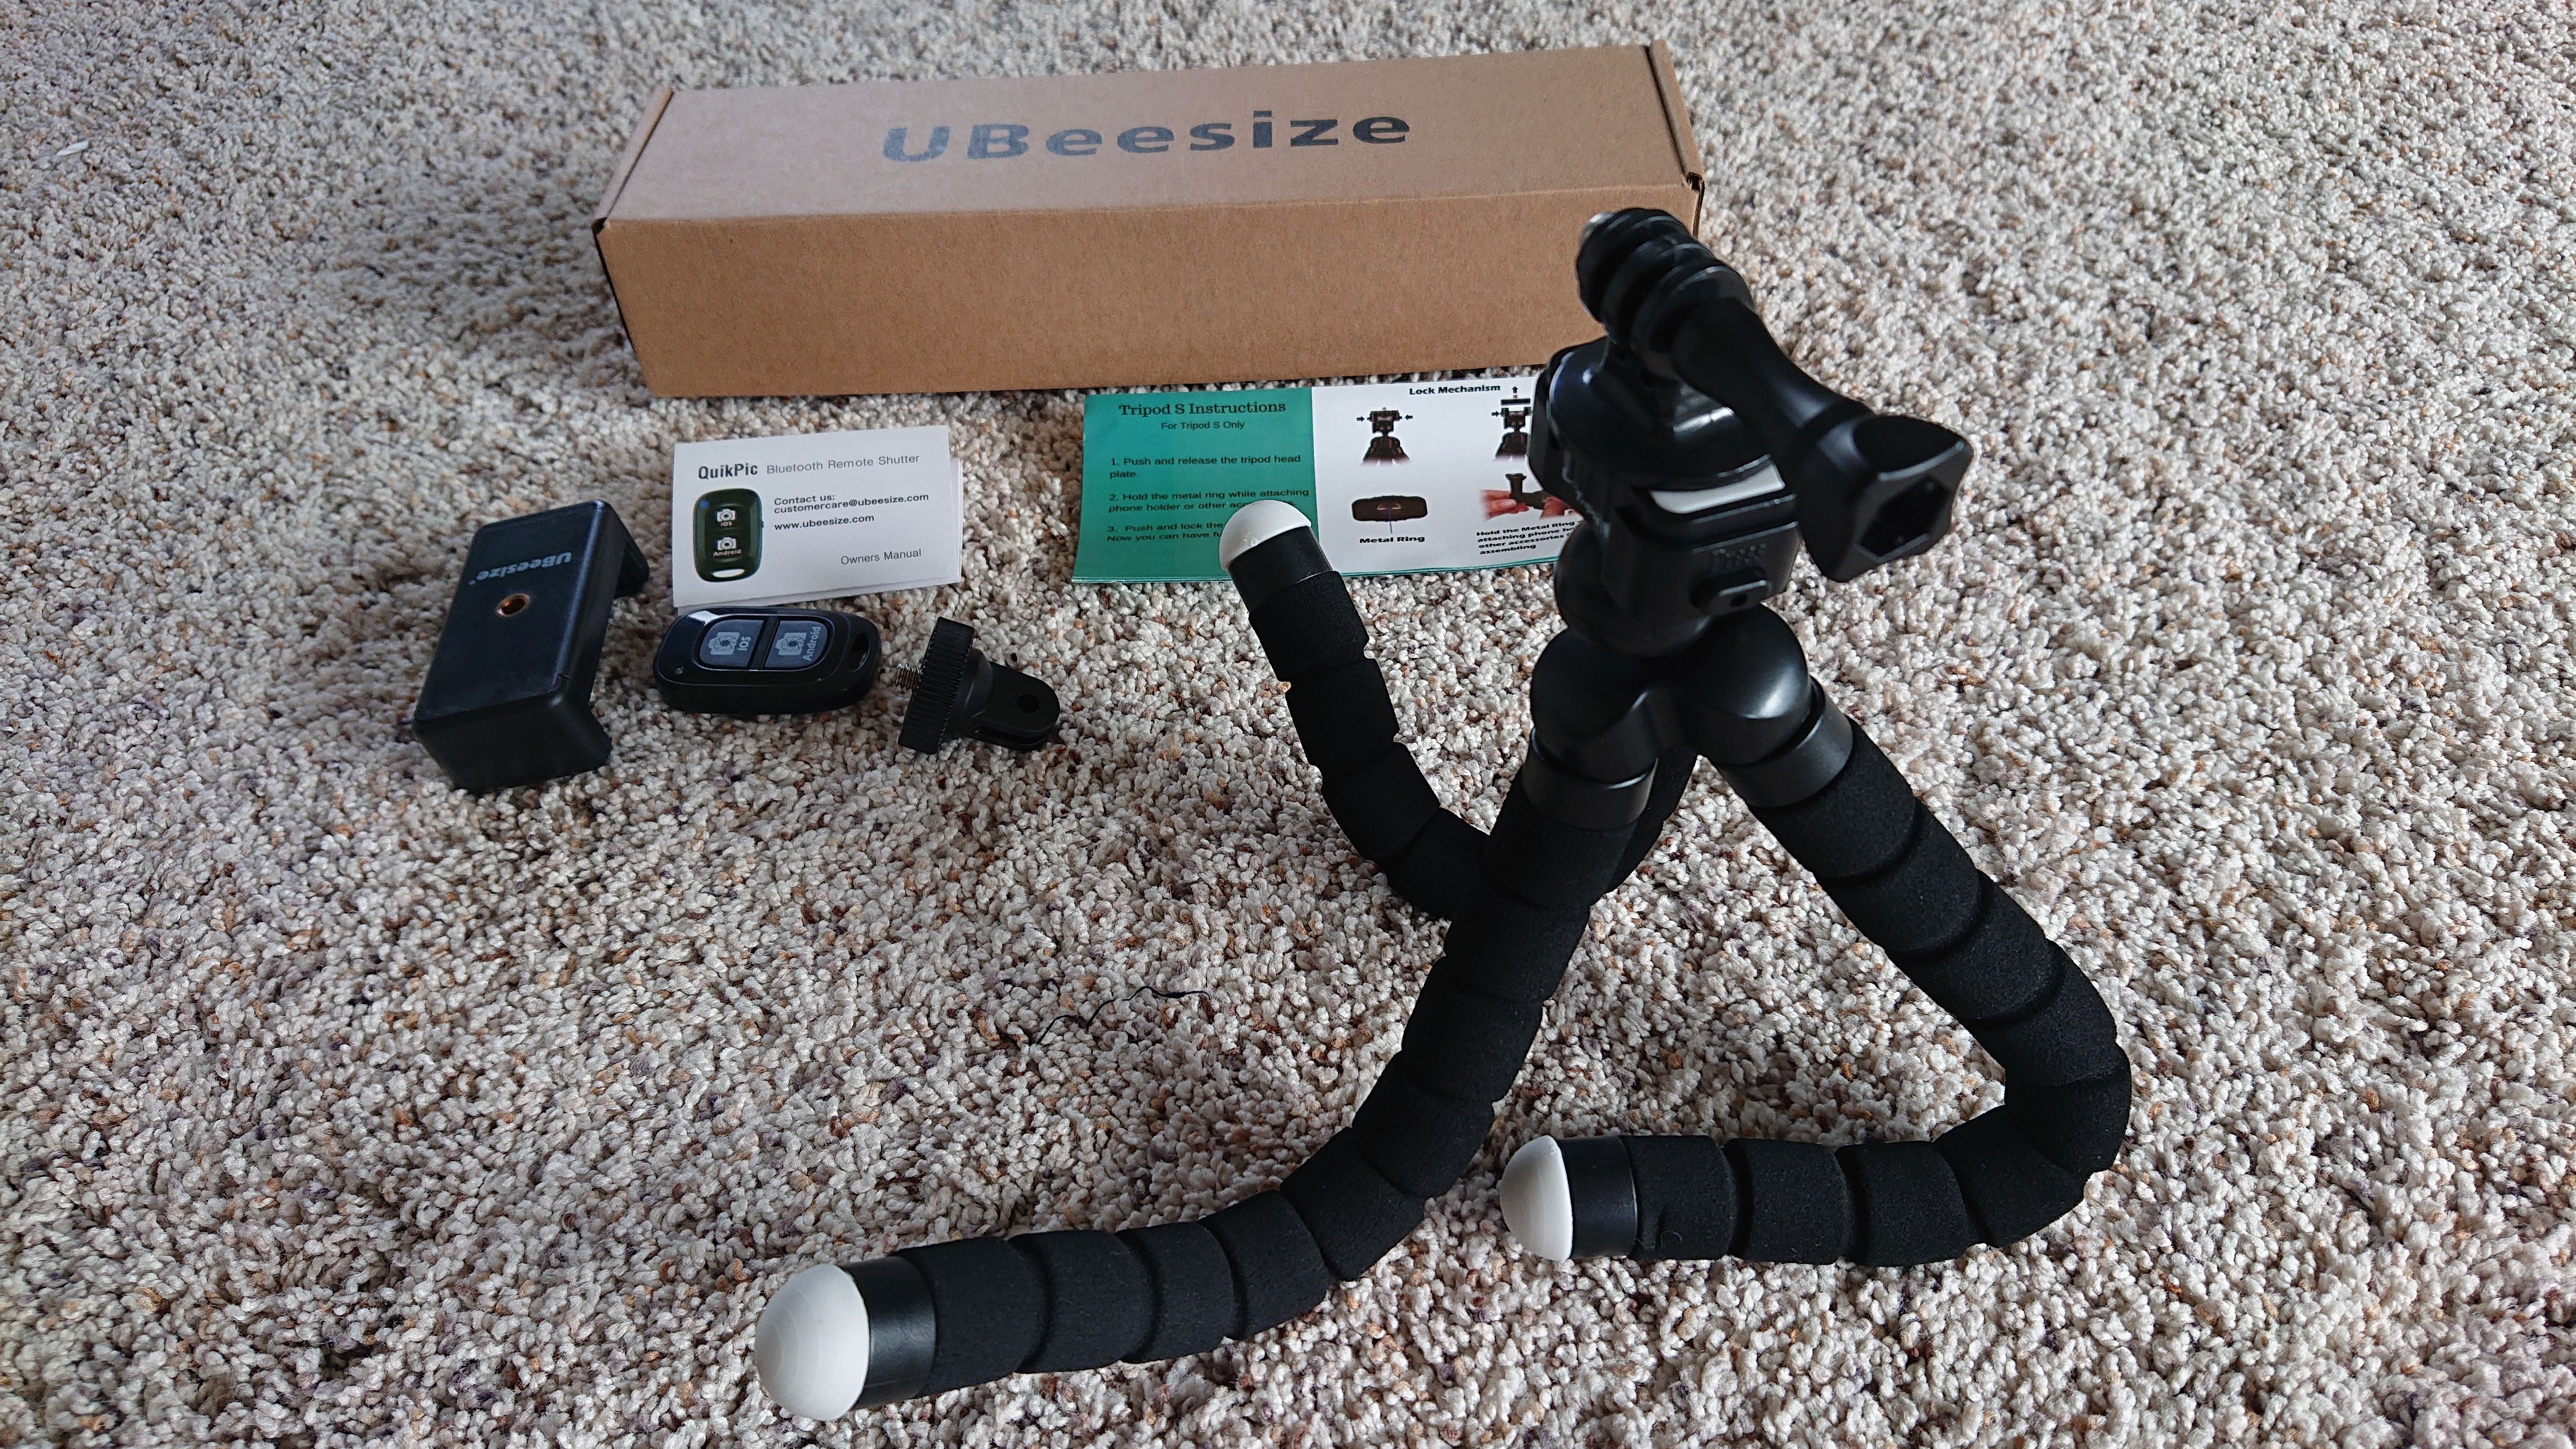 Ubeesize Cellphone Tripod with remote